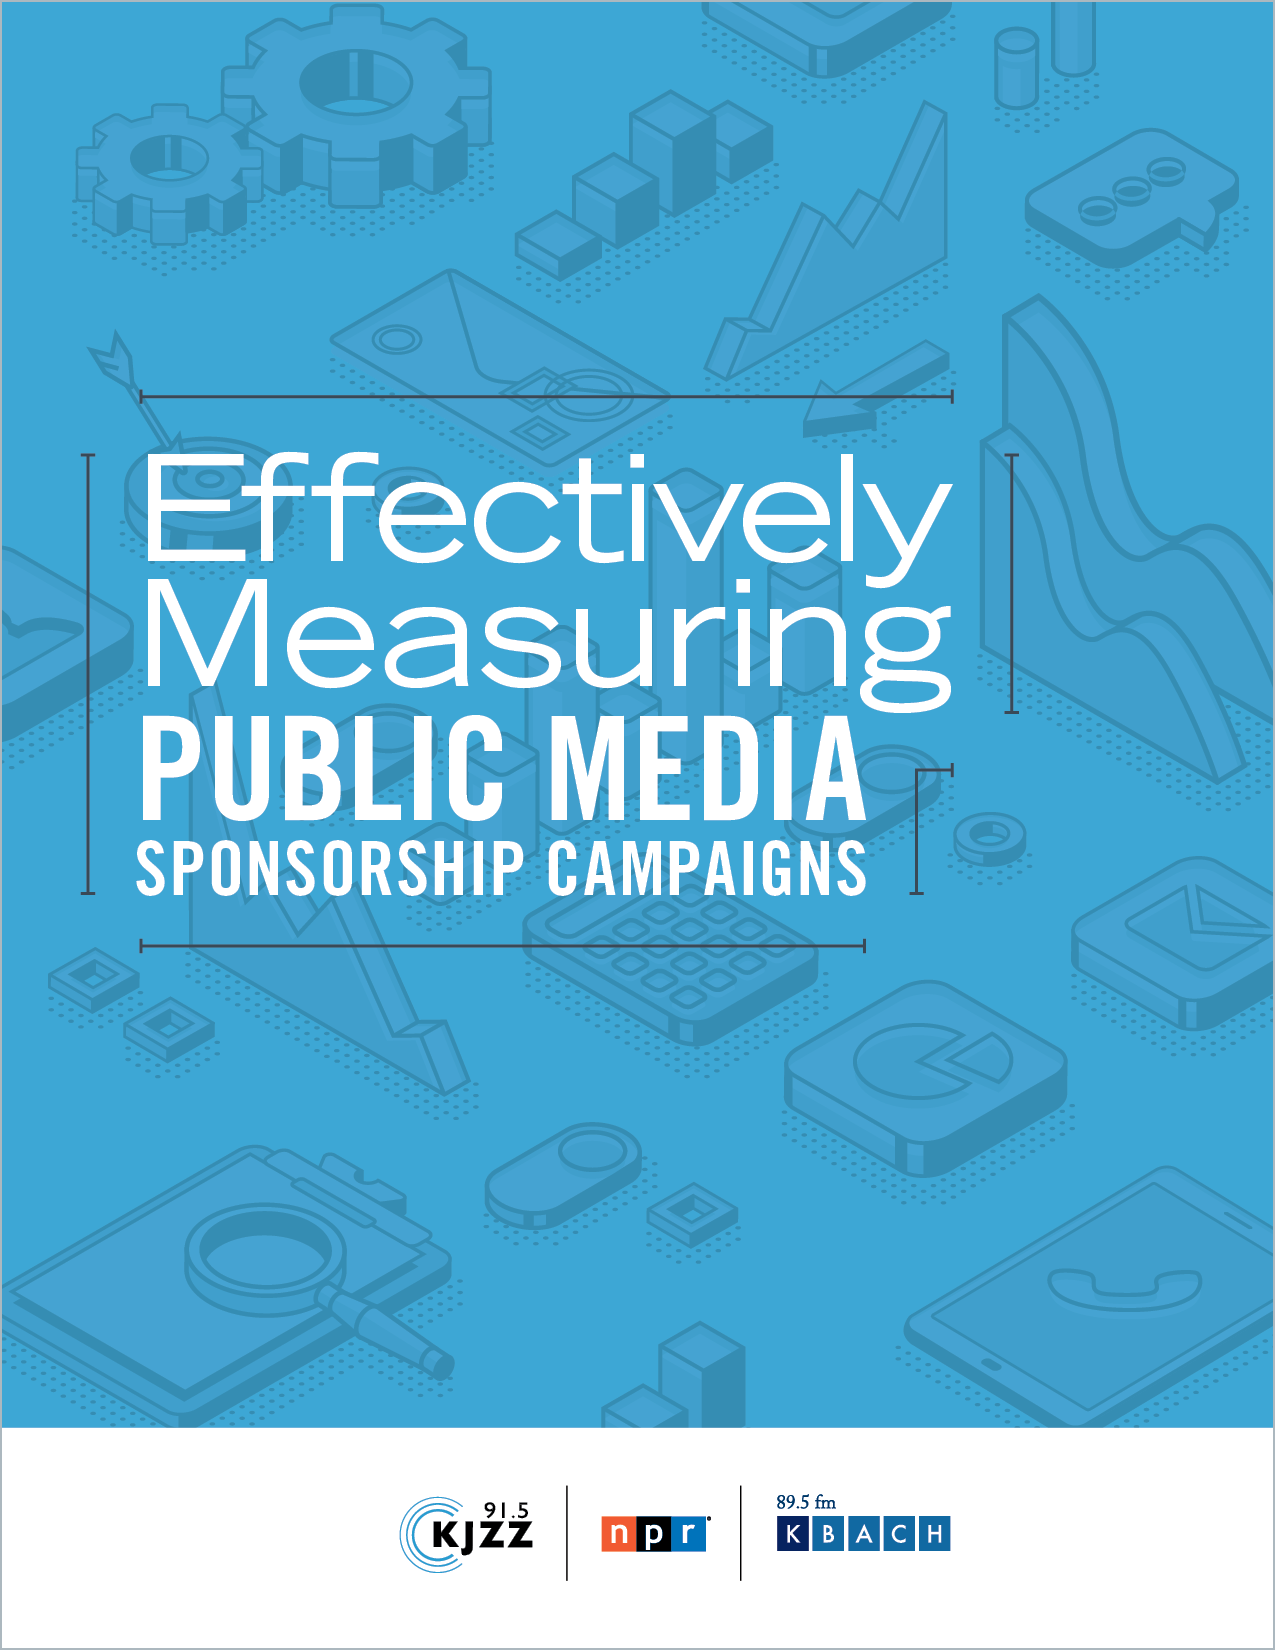 Effectively Measuring Public Media Sponsorship Campaigns eBook Thumb